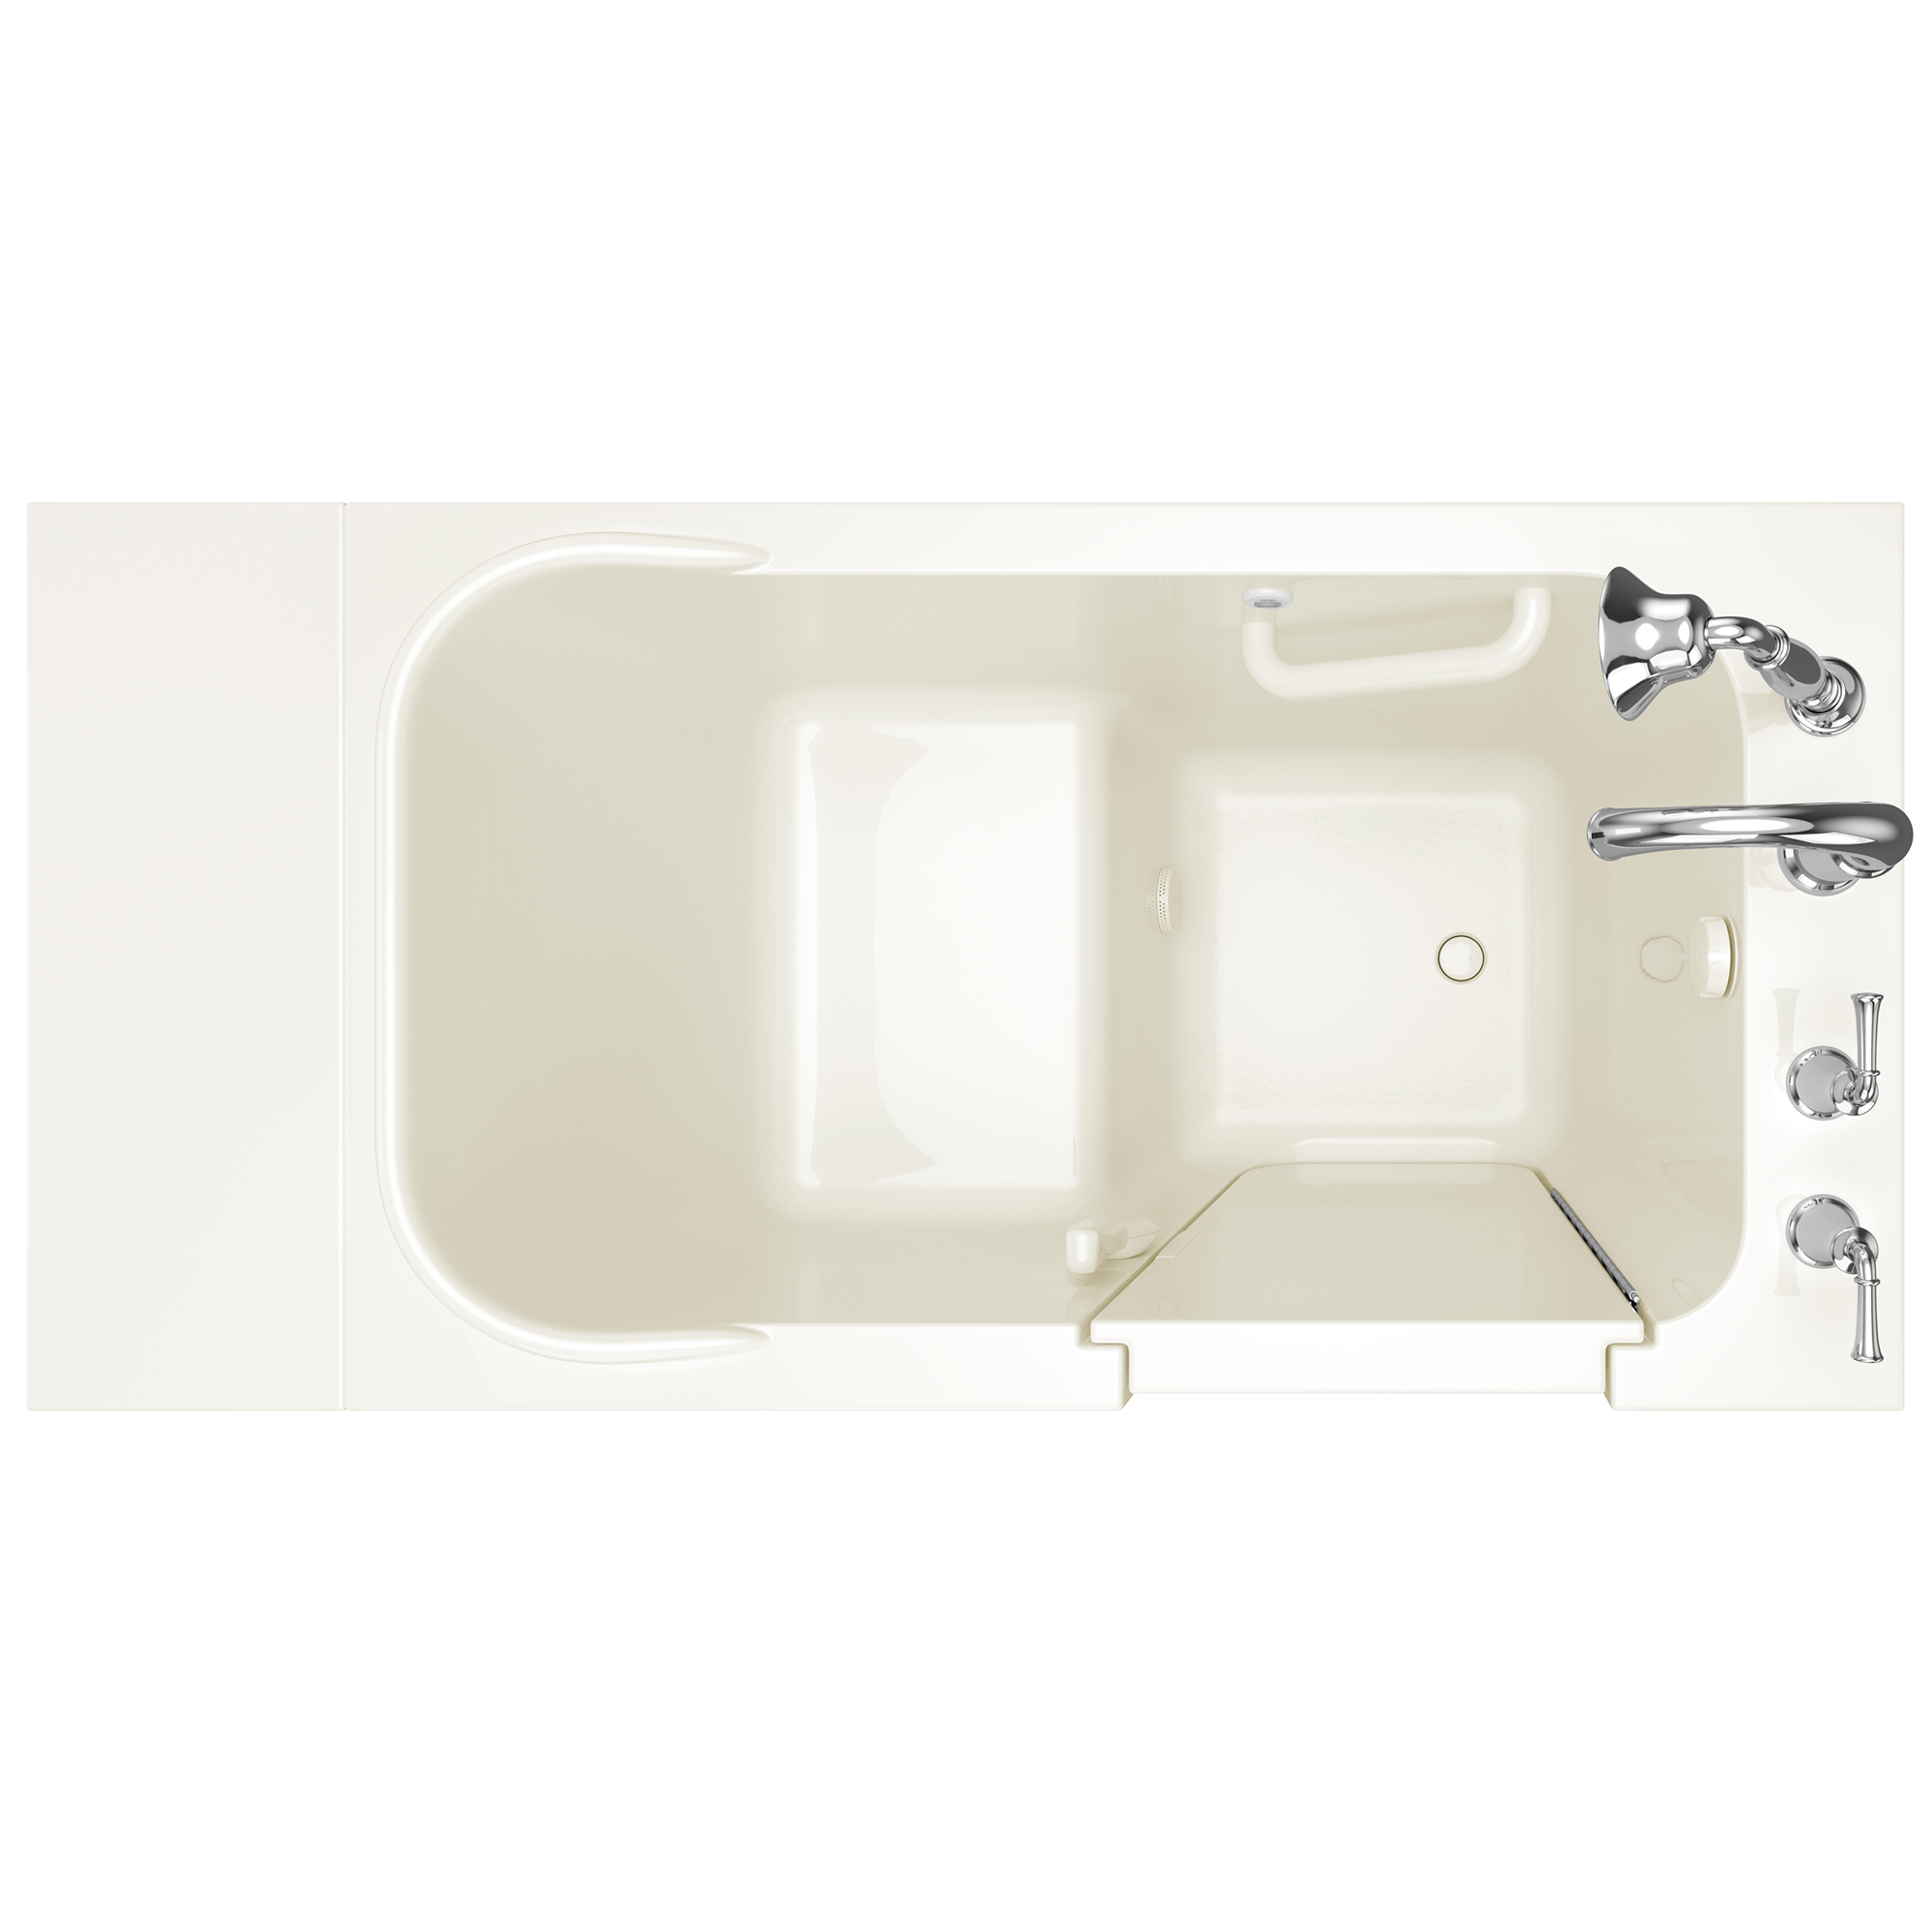 GEL Walk In Tub 48X28 Right Hand Soaker Biscuit ST BISCUIT